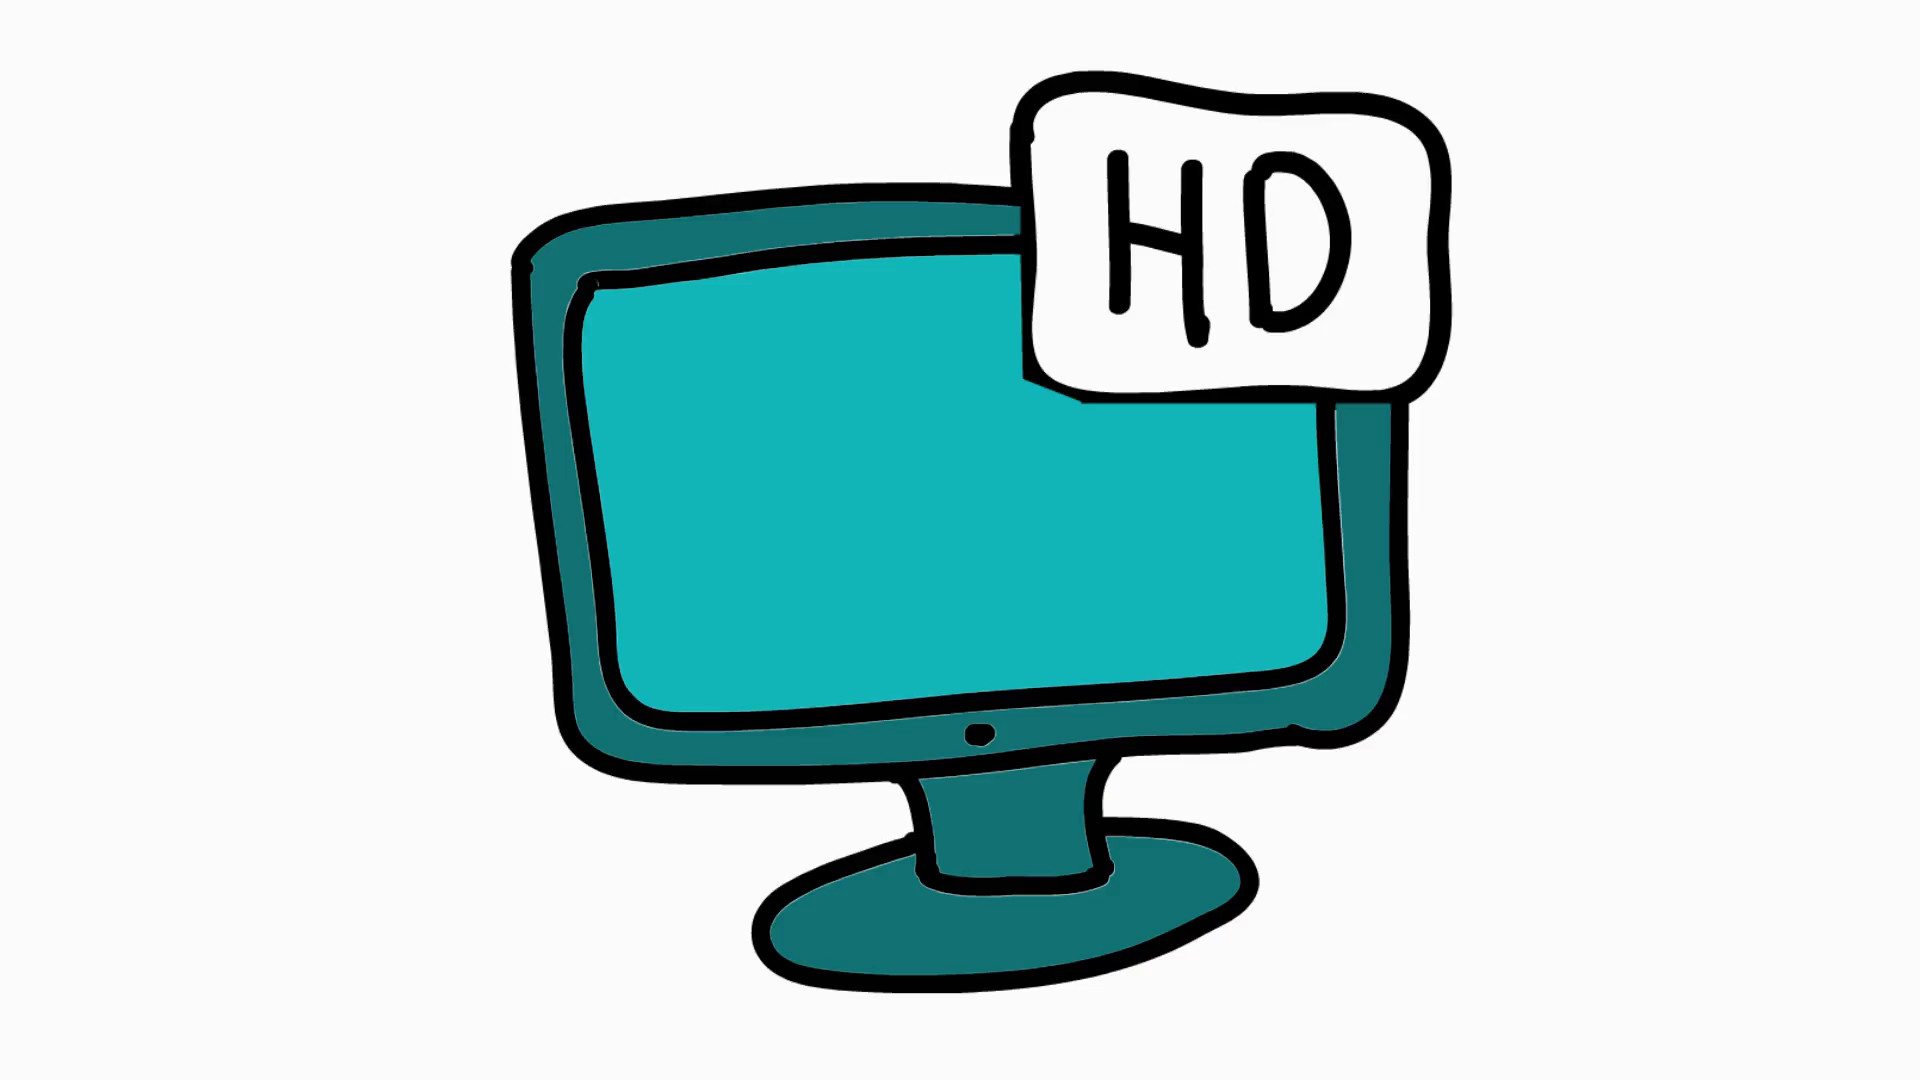 1920x1080 hd computer screen hand drawn animation with transparent background Motion  Background - VideoBlocks